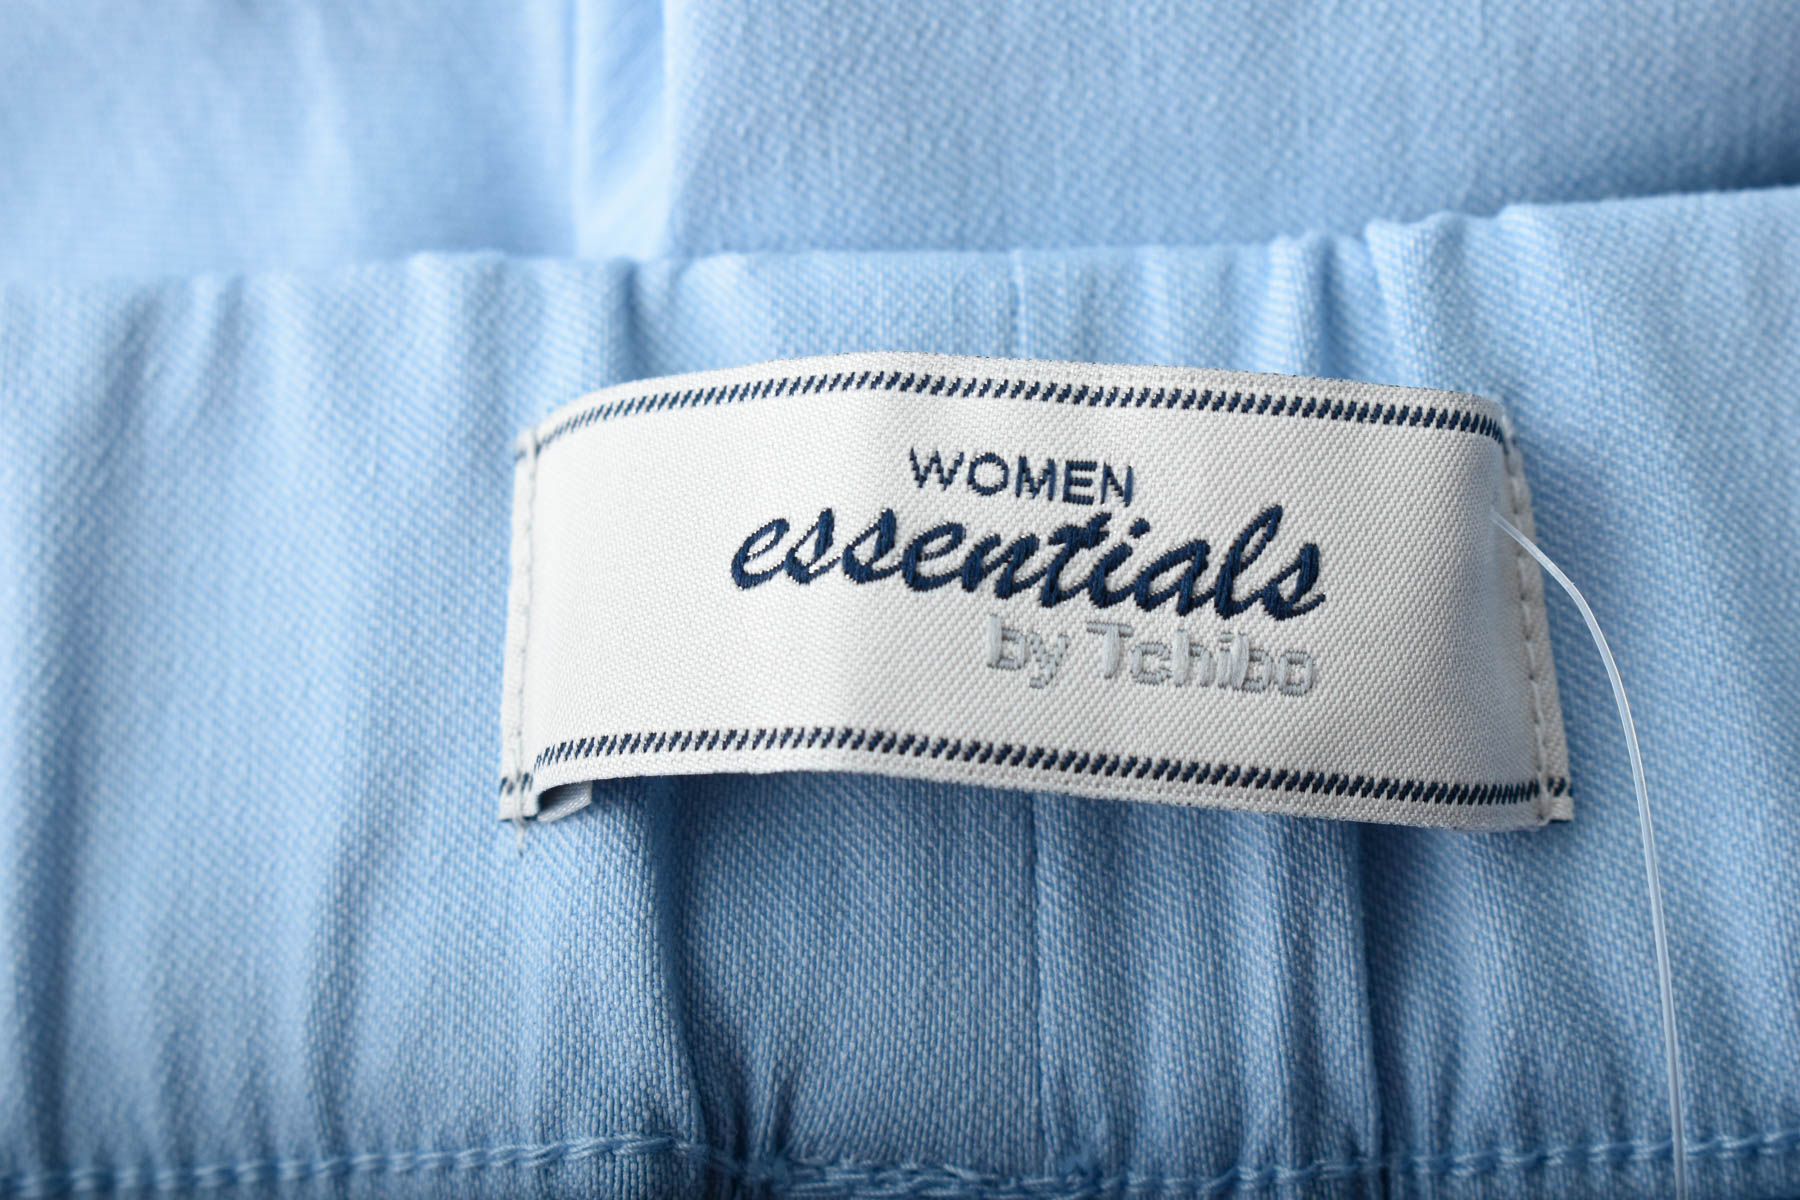 Women's trousers - WOMEN essentials by Tchibo - 2